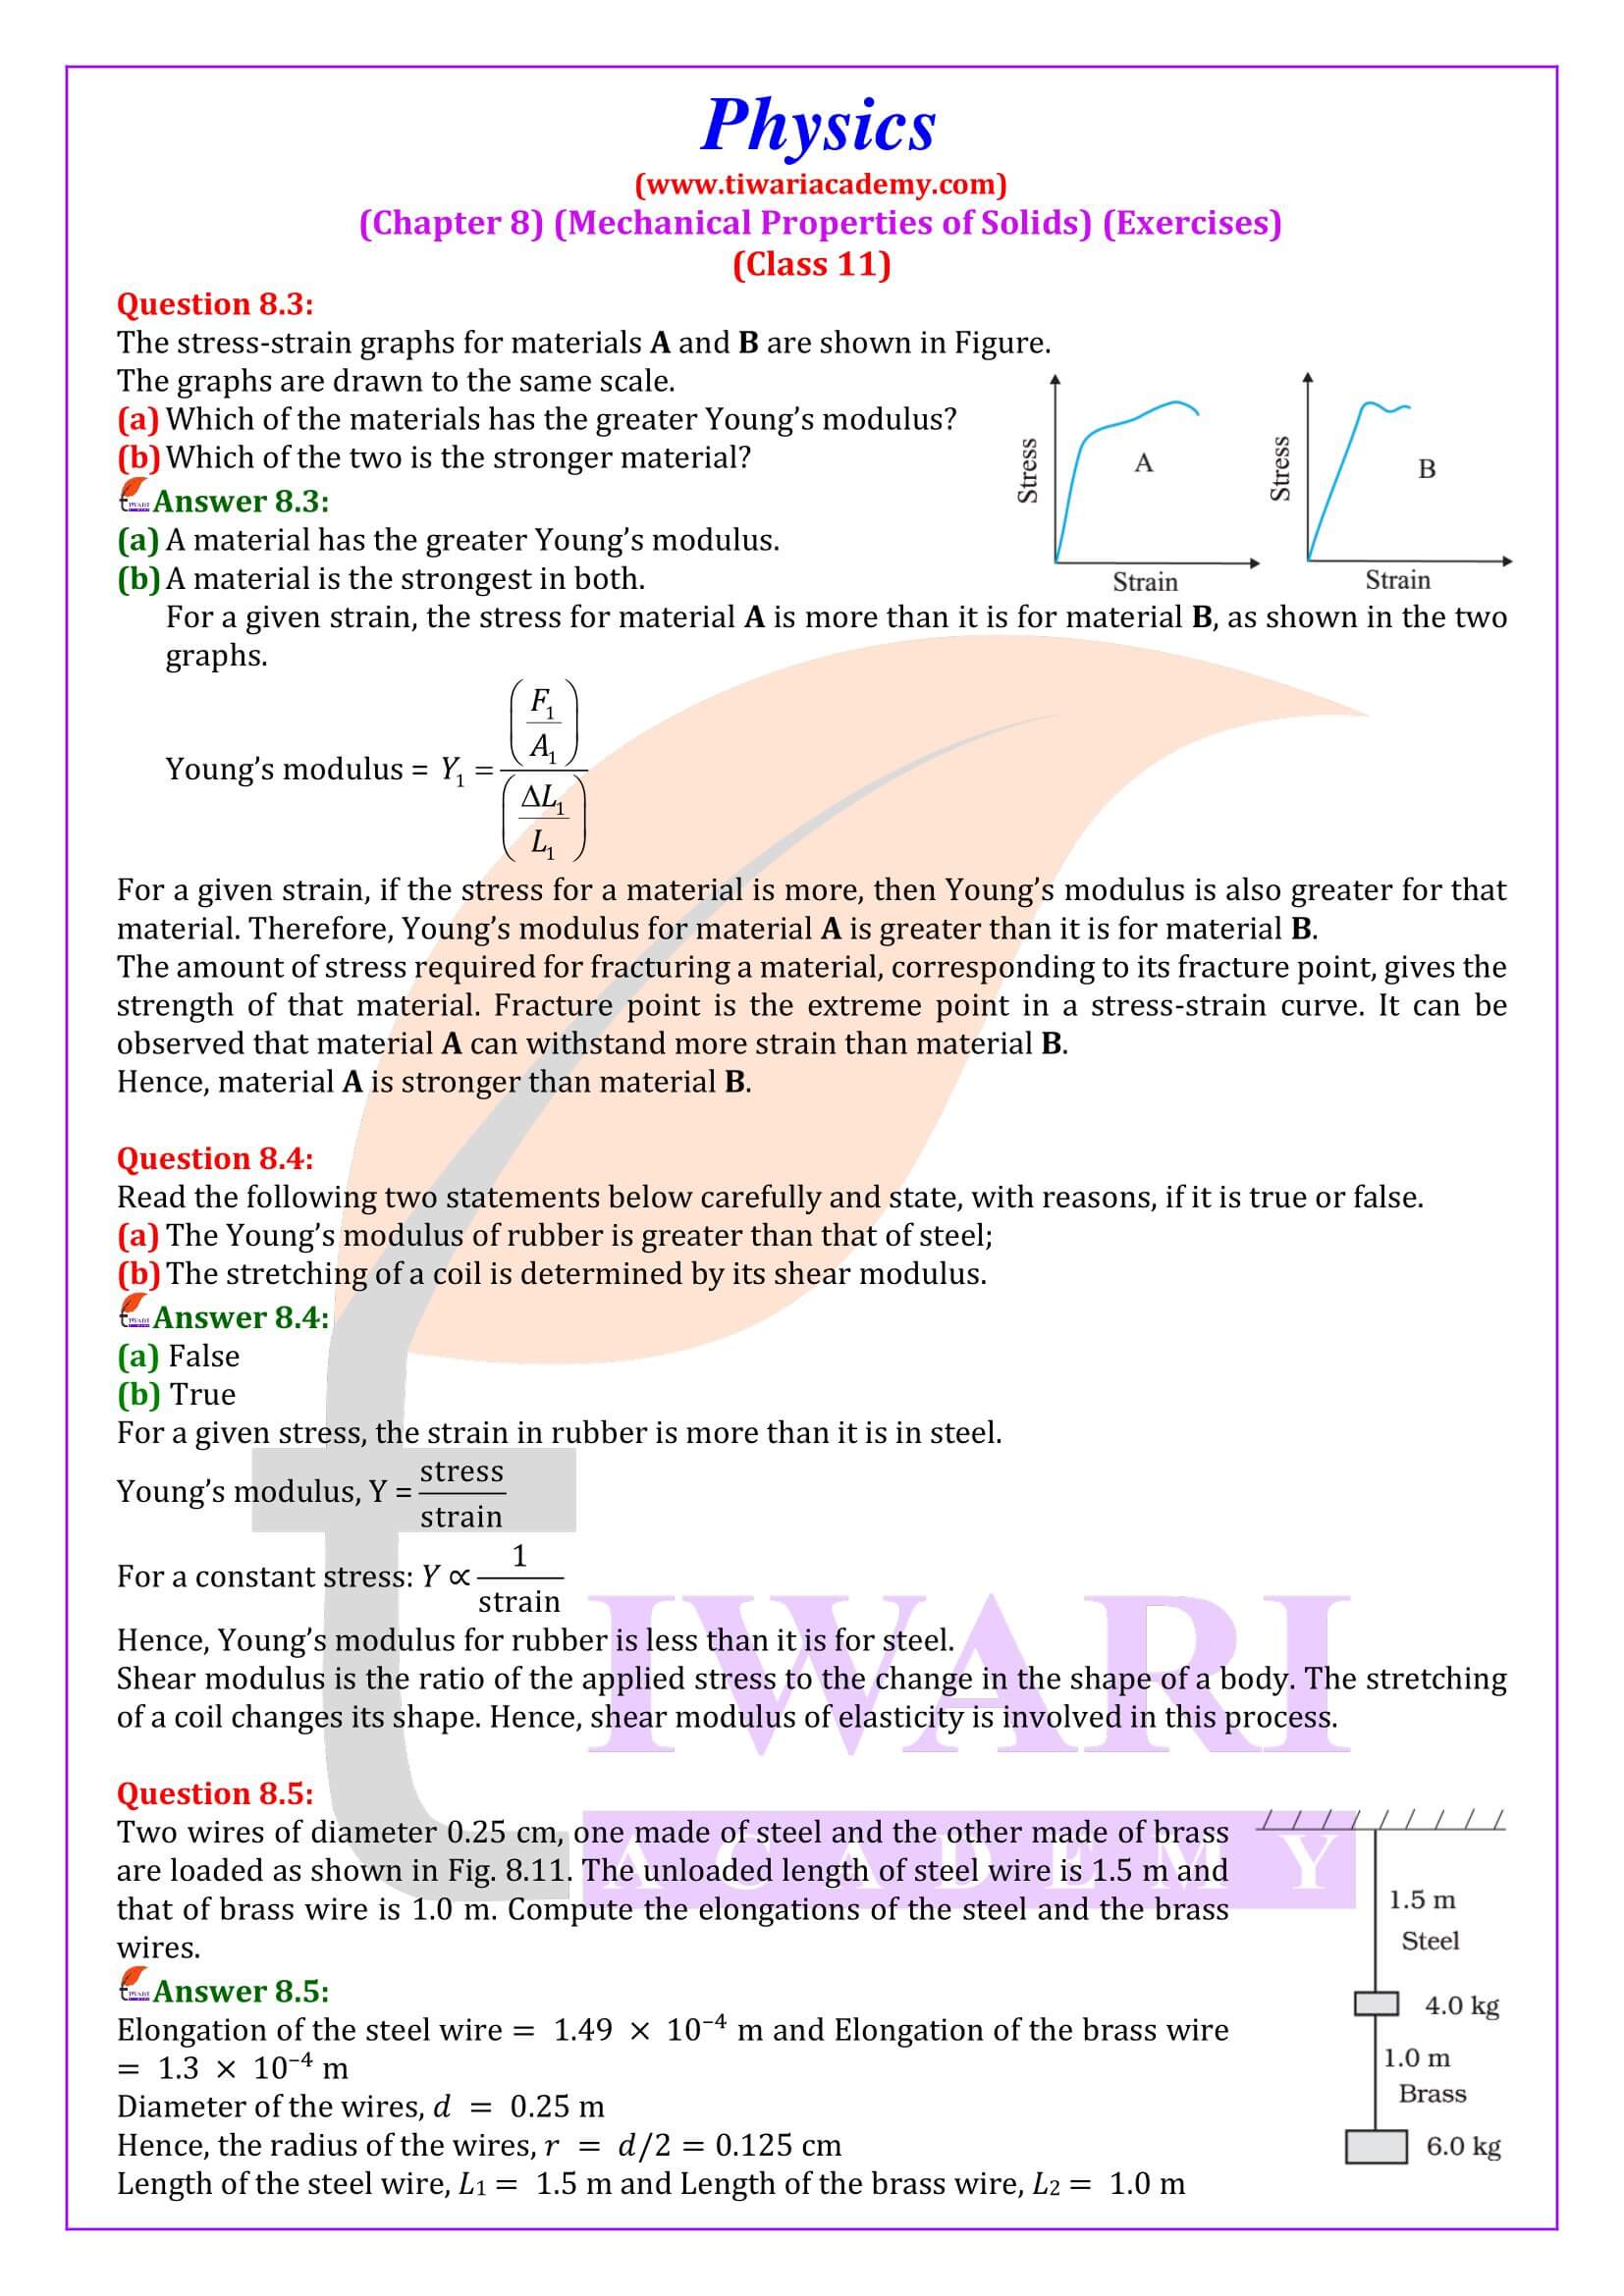 Class 11 Physics Chapter 8 Mechanical Properties of Solids